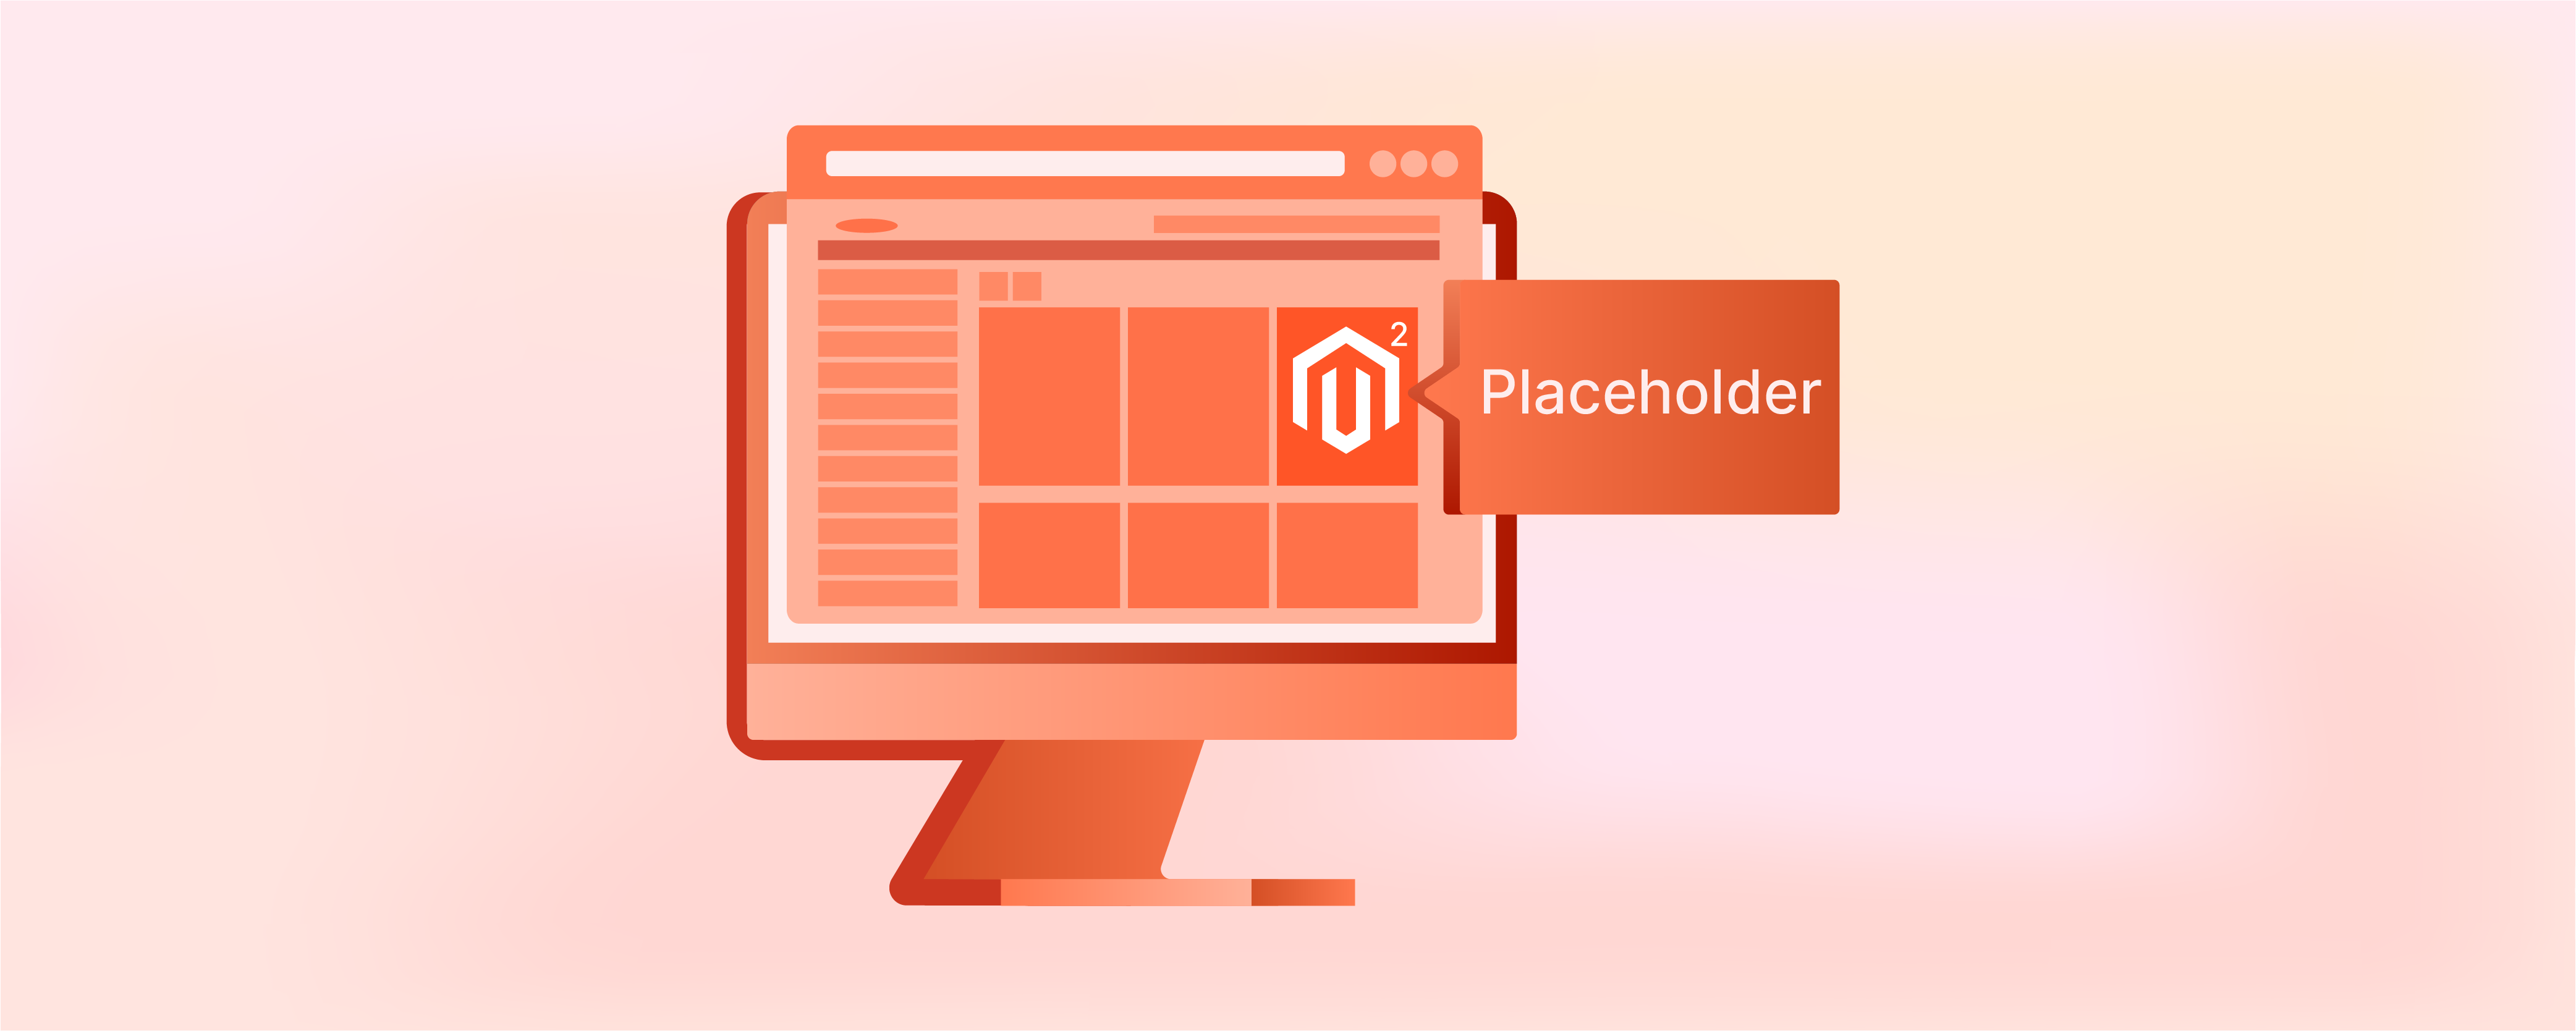 How to Upload Magento 2 Placeholder Image: 3 Steps